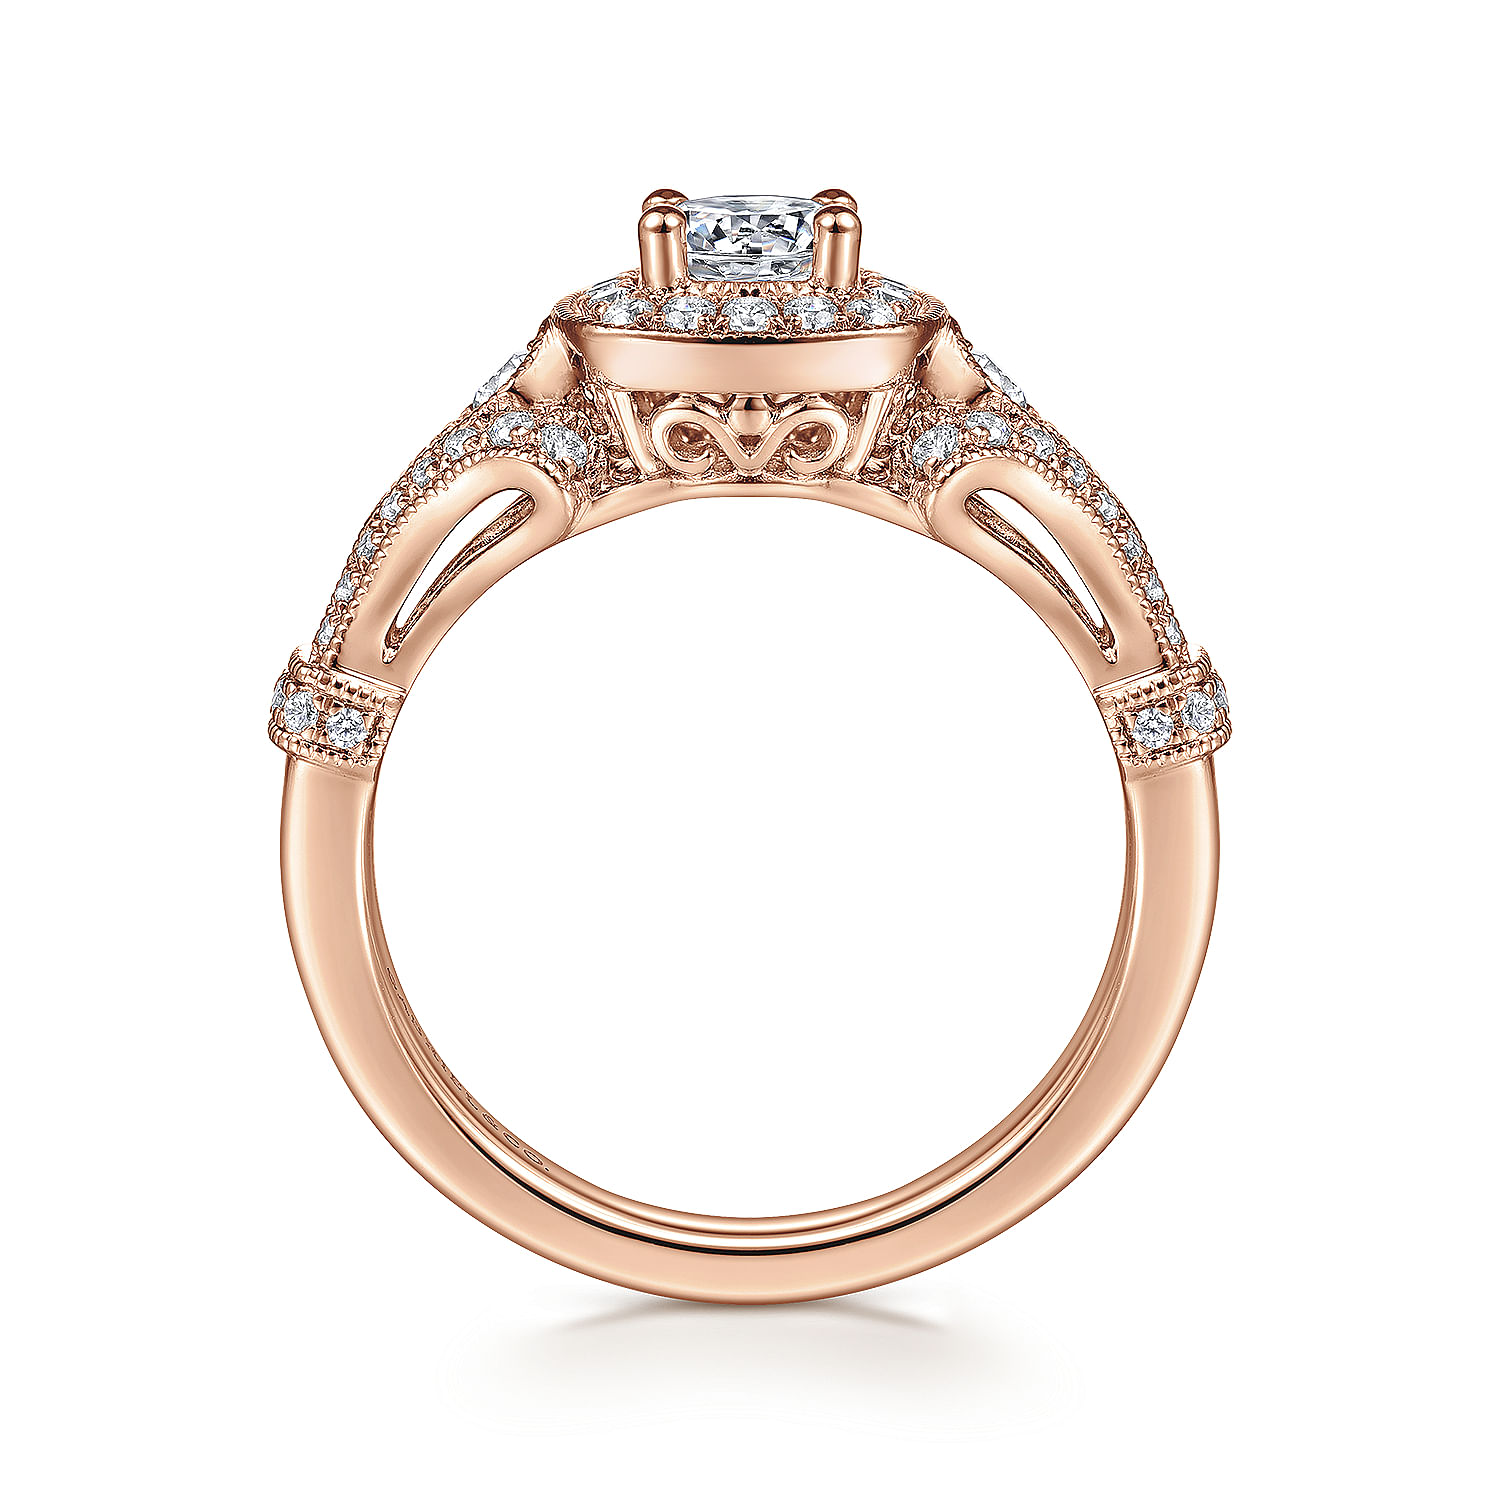 Vintage Inspired 14K Rose Gold Cushion Halo Round Complete Diamond Engagement Ring